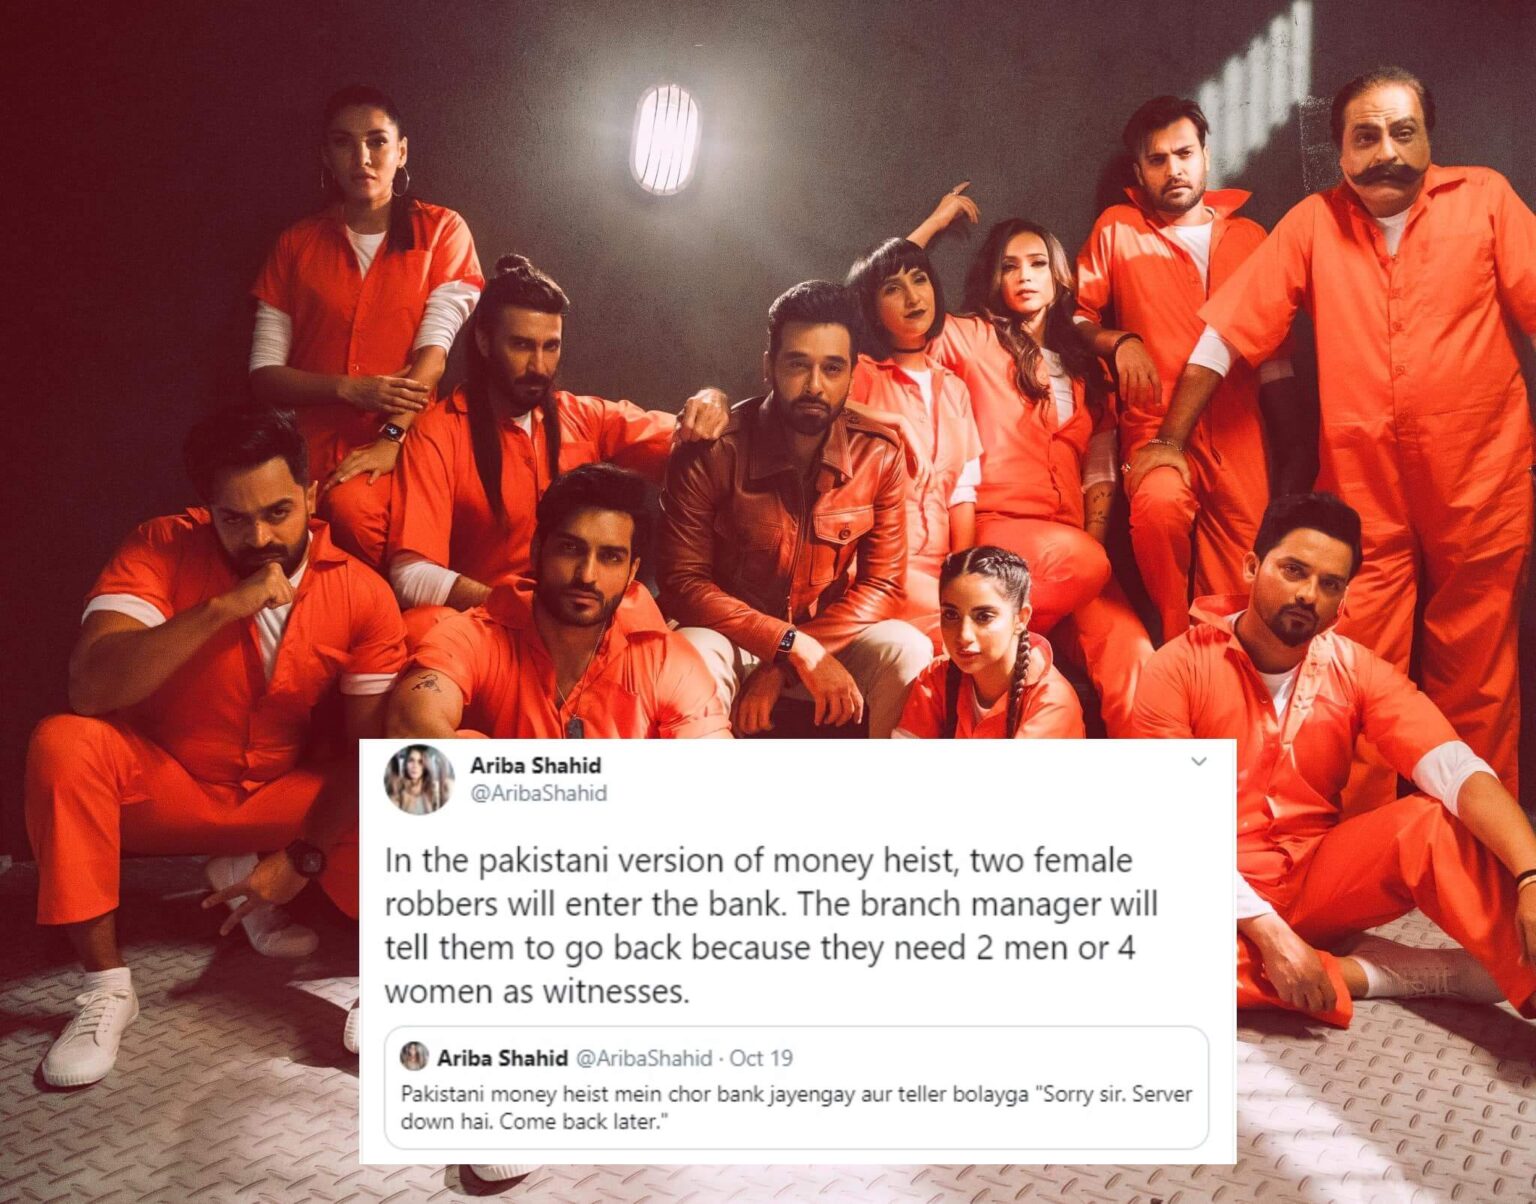 'Money Heist' is easily one of the biggest shows on Netflix worldwide, so it's no surprise others are trying to copy the show's fomula. But fans aren't happy.